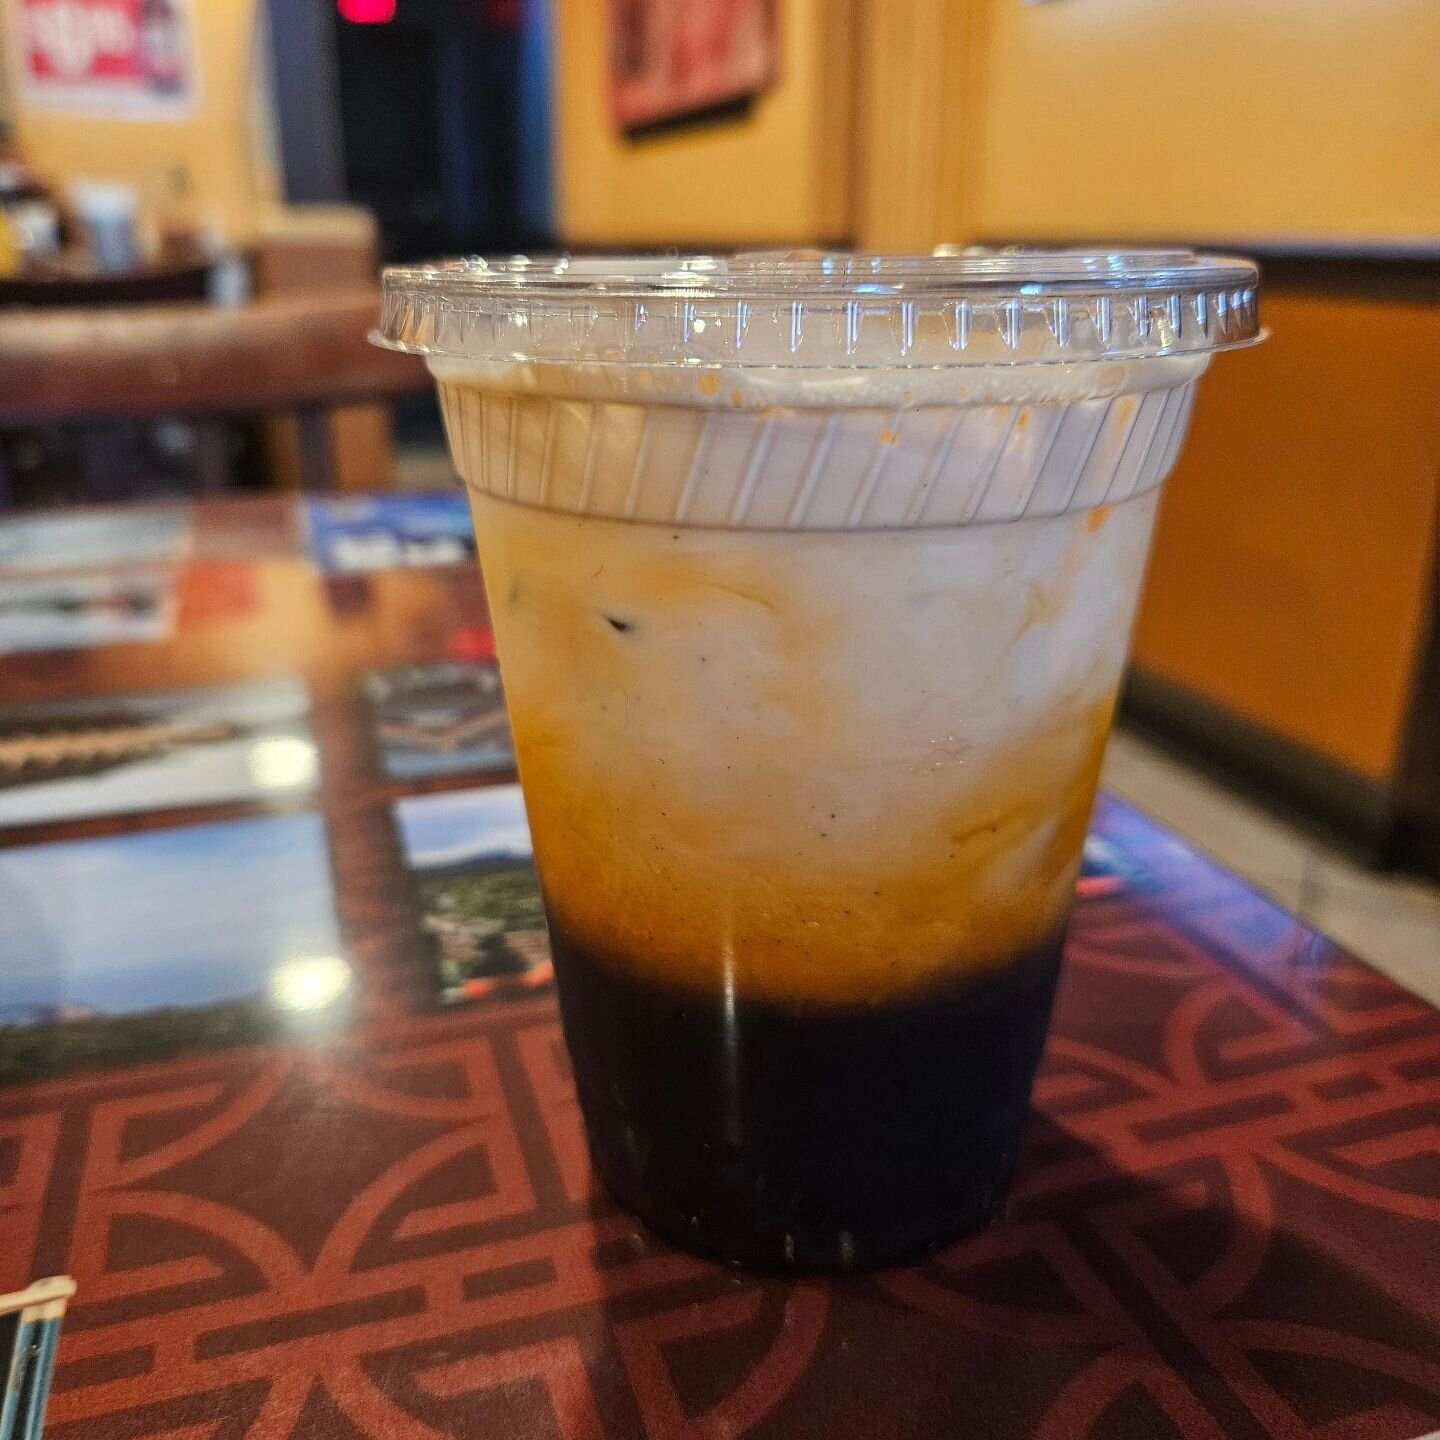 For a limited time only, Thai tea is back on the menu!

#localbusiness #elcentroca #luckychineserestaurant #smallbusiness #chinesefood